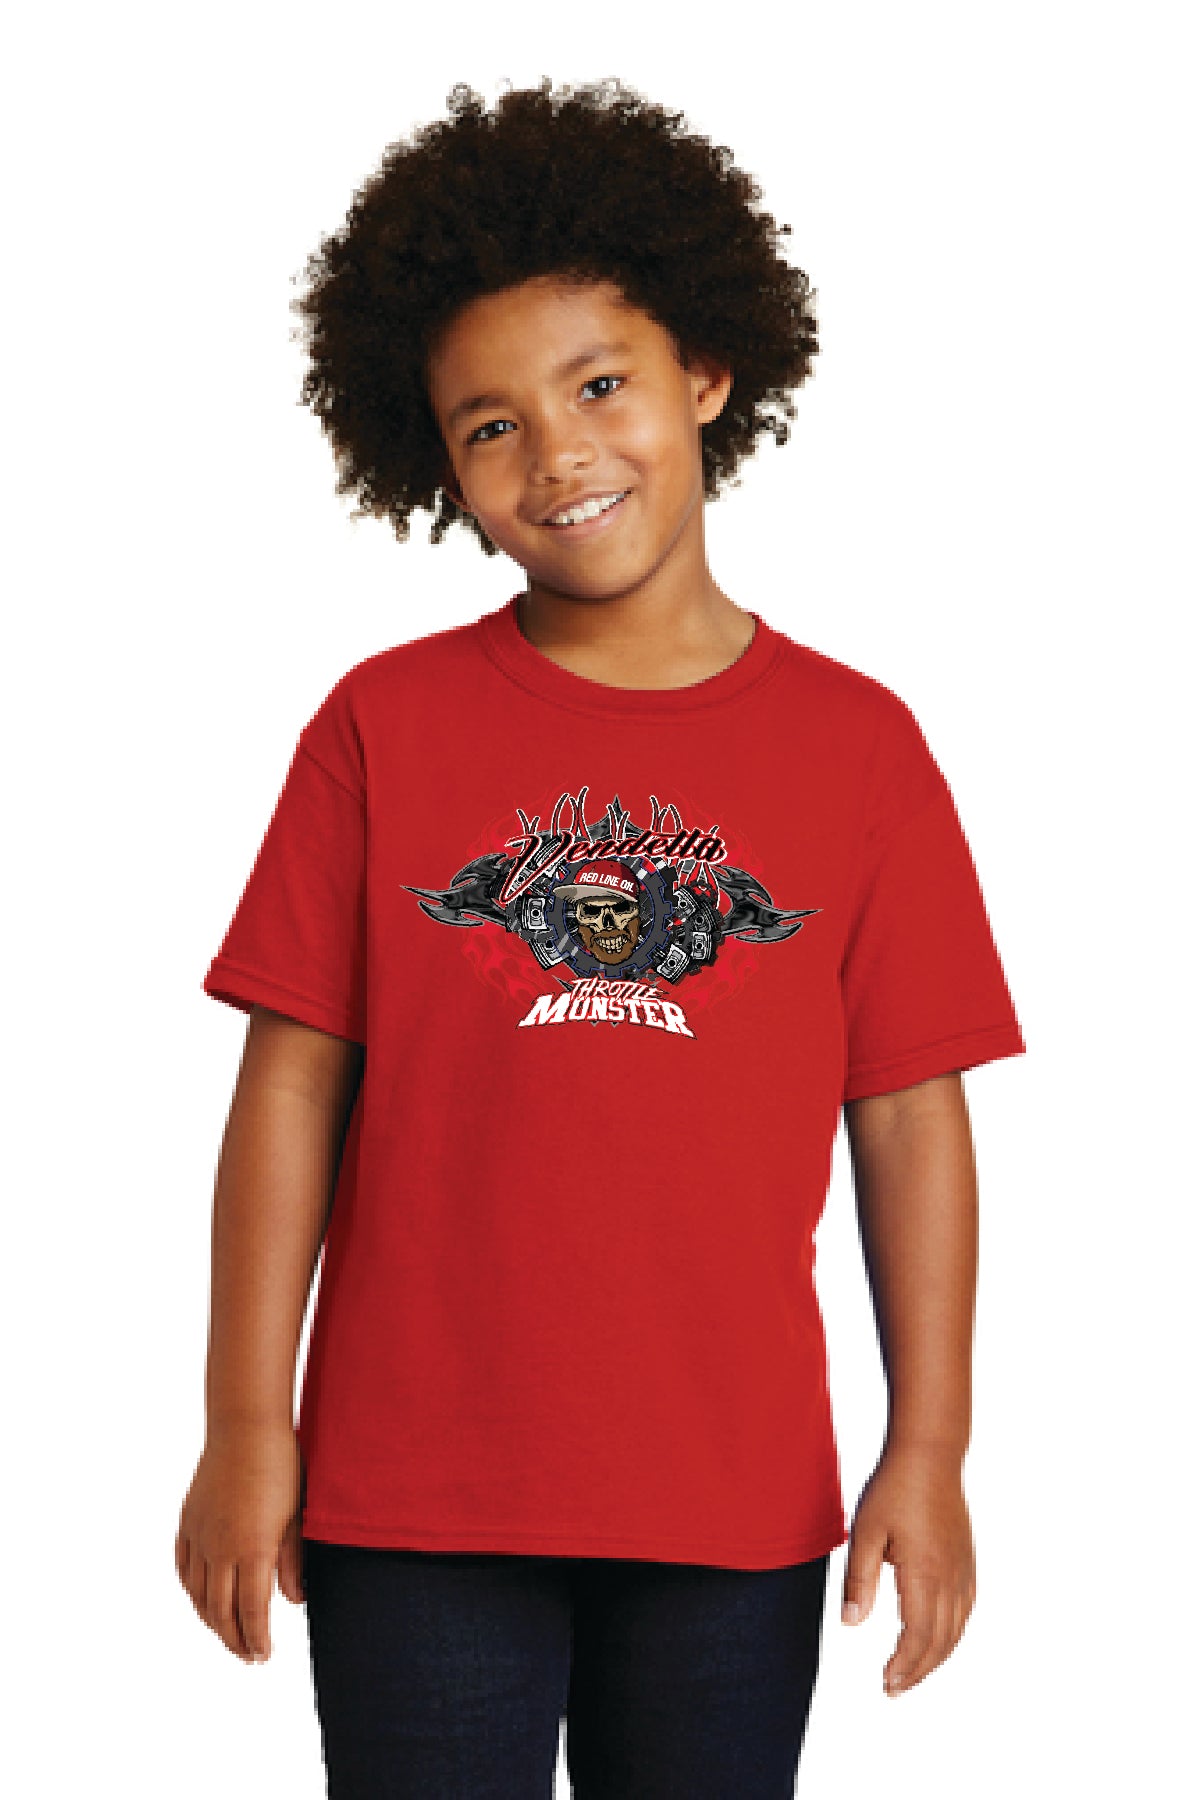 Kid's Vendetta Red Shirt Front